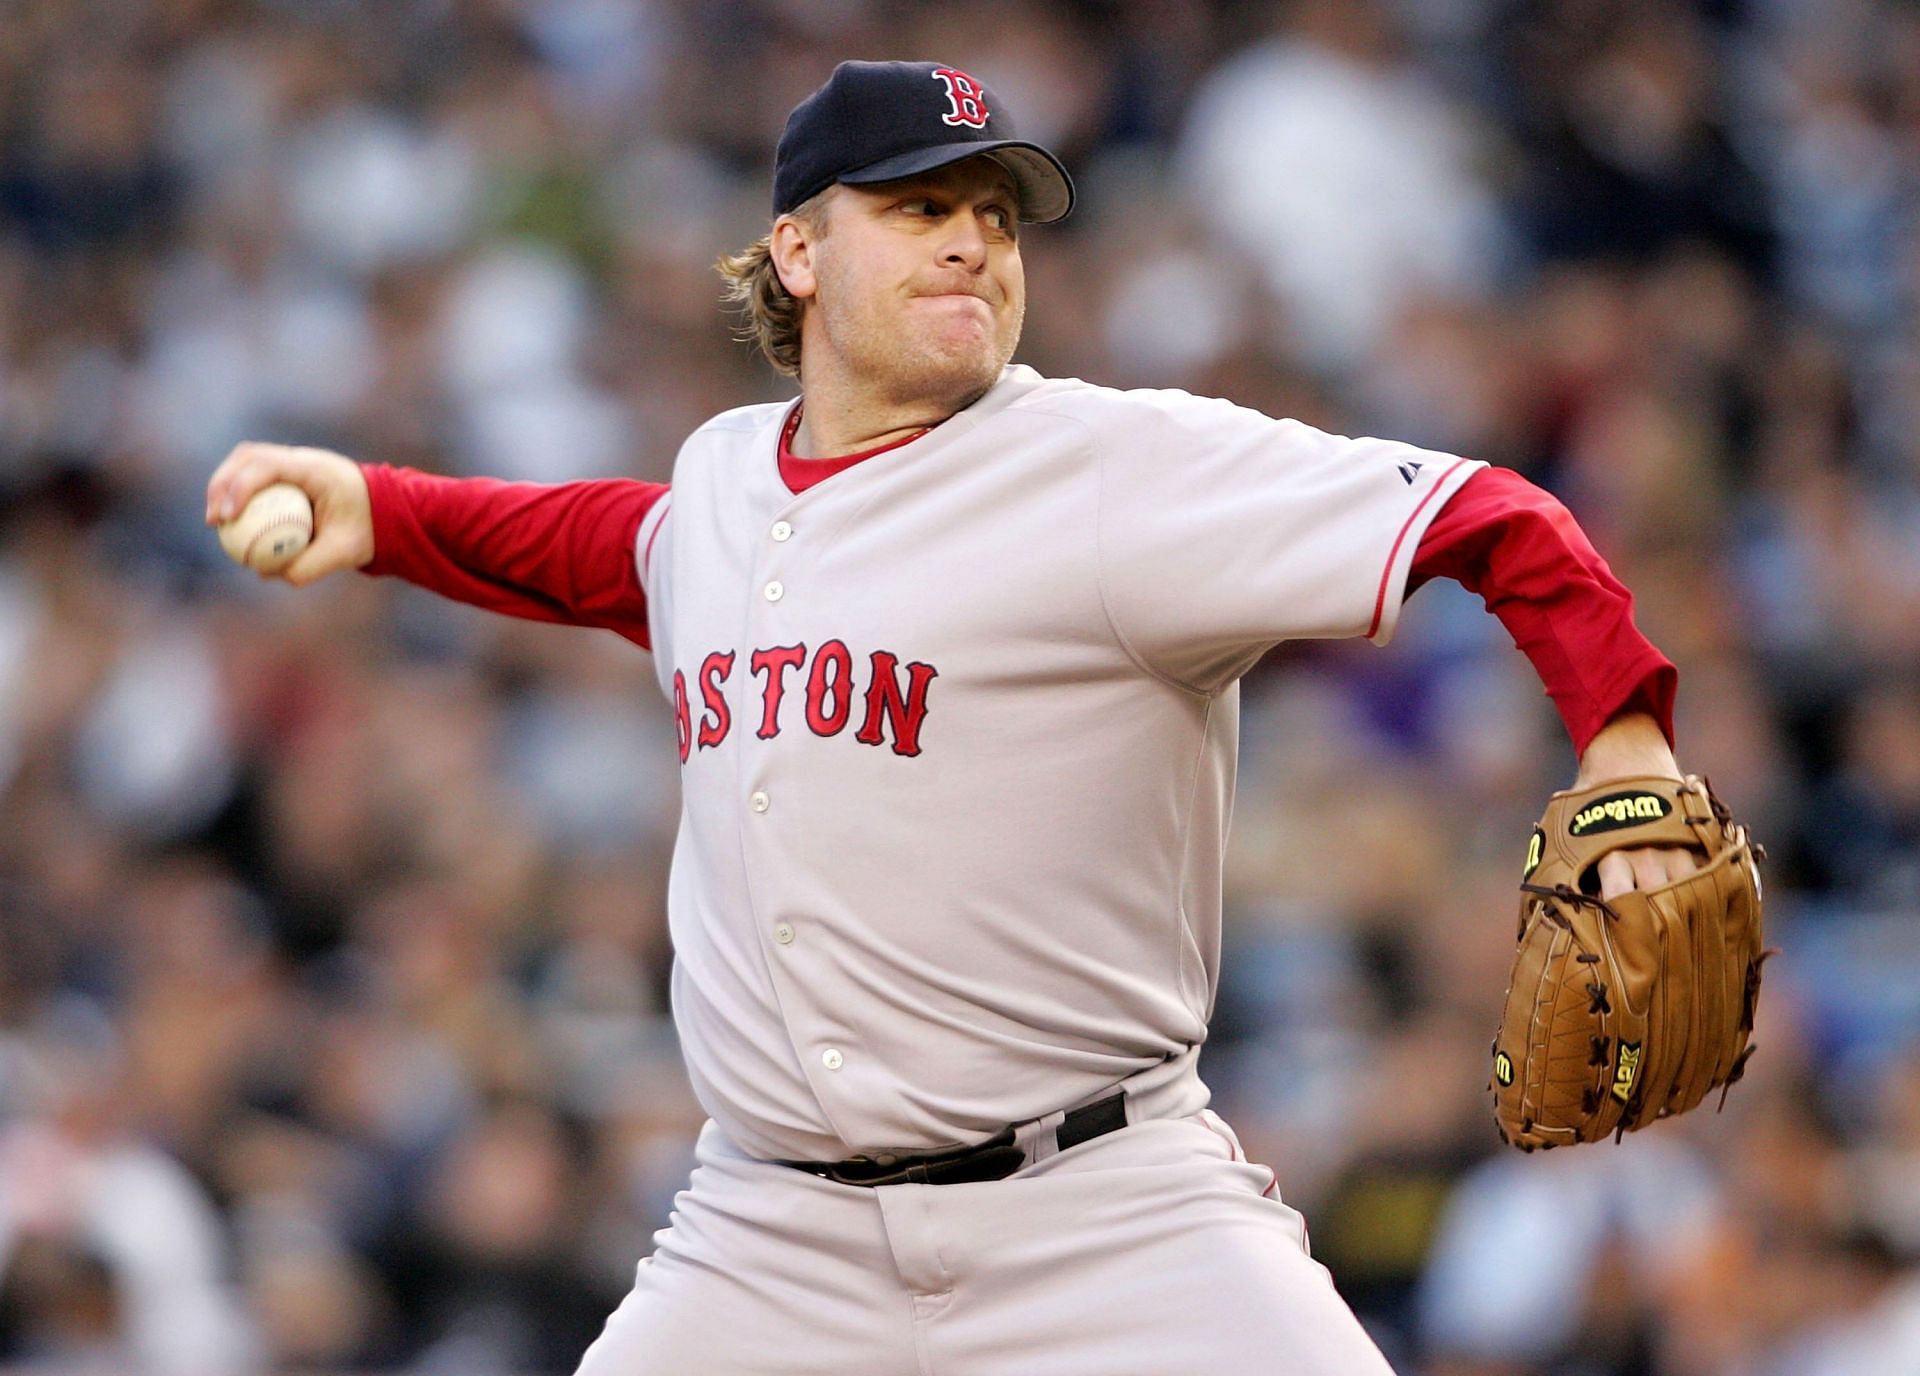 Curt Schilling (38) of the Boston Red Sox pitches against the New York Yankees on May 10, 2006, at Yankee Stadium (Photo by Nick Laham/Getty Images)